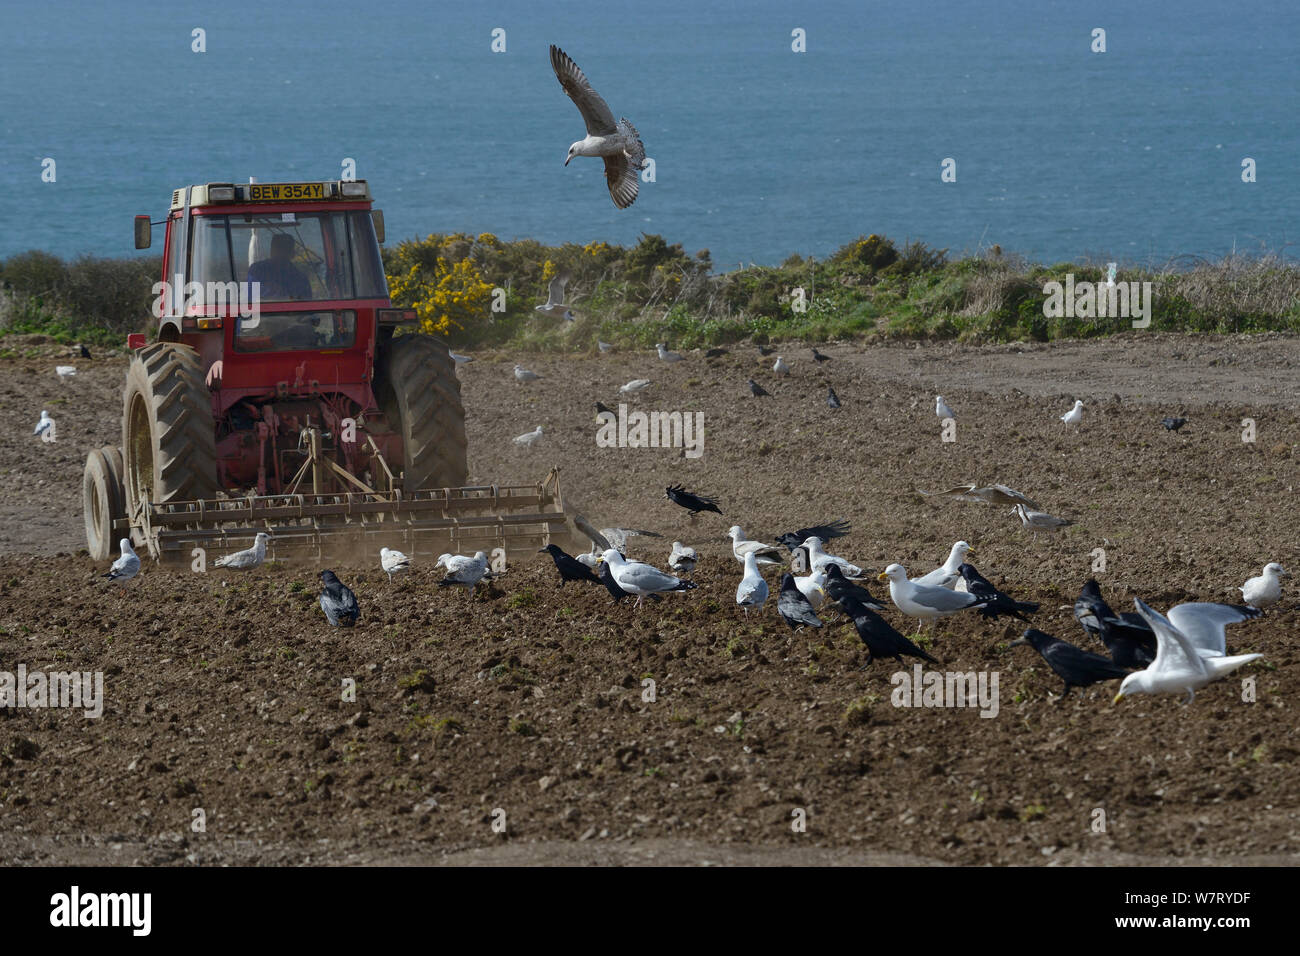 Mixed flock of Herring gulls (Larus argentatus) and Rooks (Corvus frugilegus) following a tractor ploughing a clifftop field with the sea in the background, Trebetherick, Cornwall, UK, April. Stock Photo